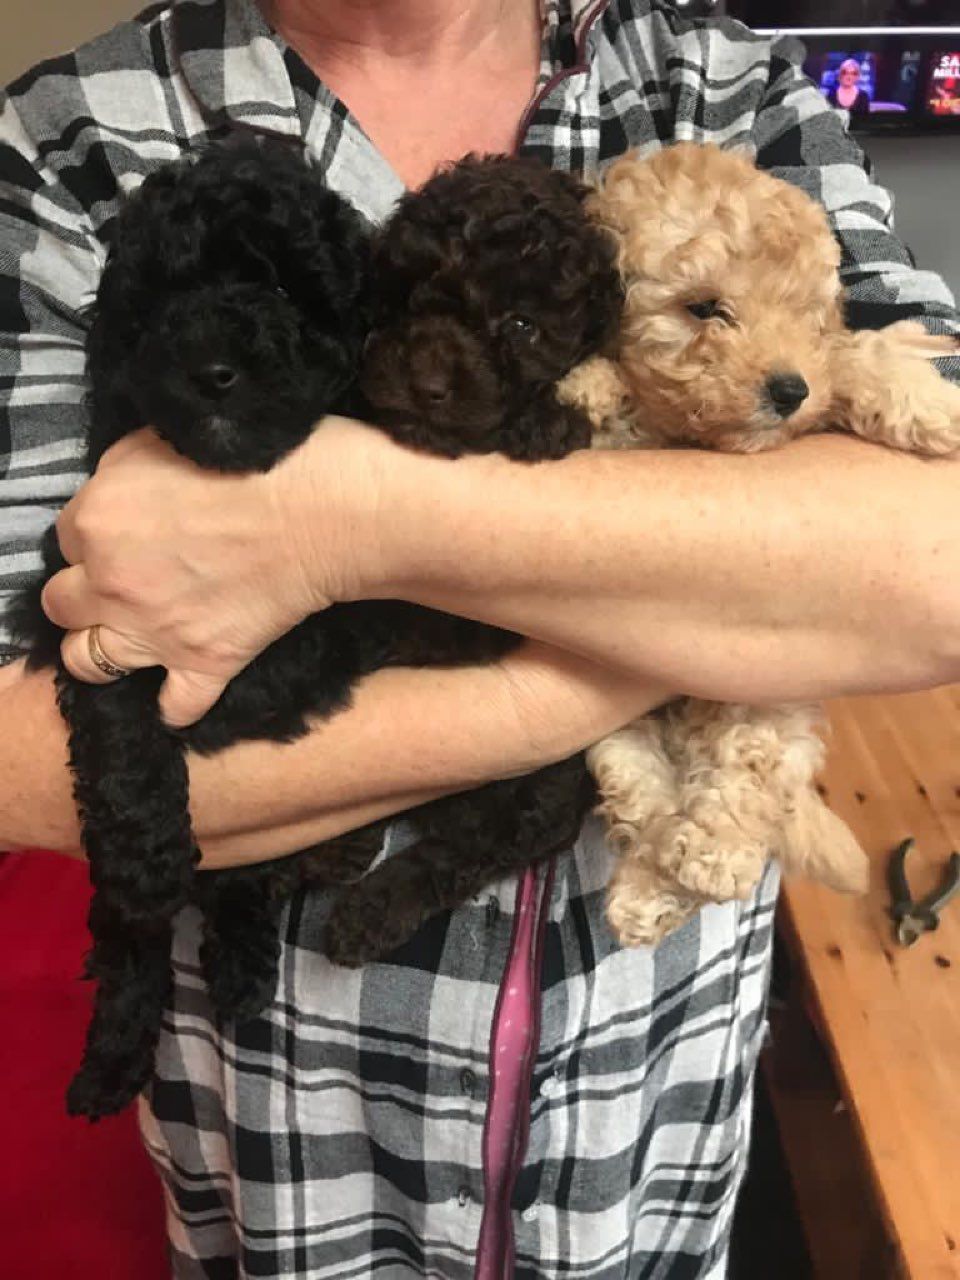 Miniature Poodle puppies (+447440524997) These go